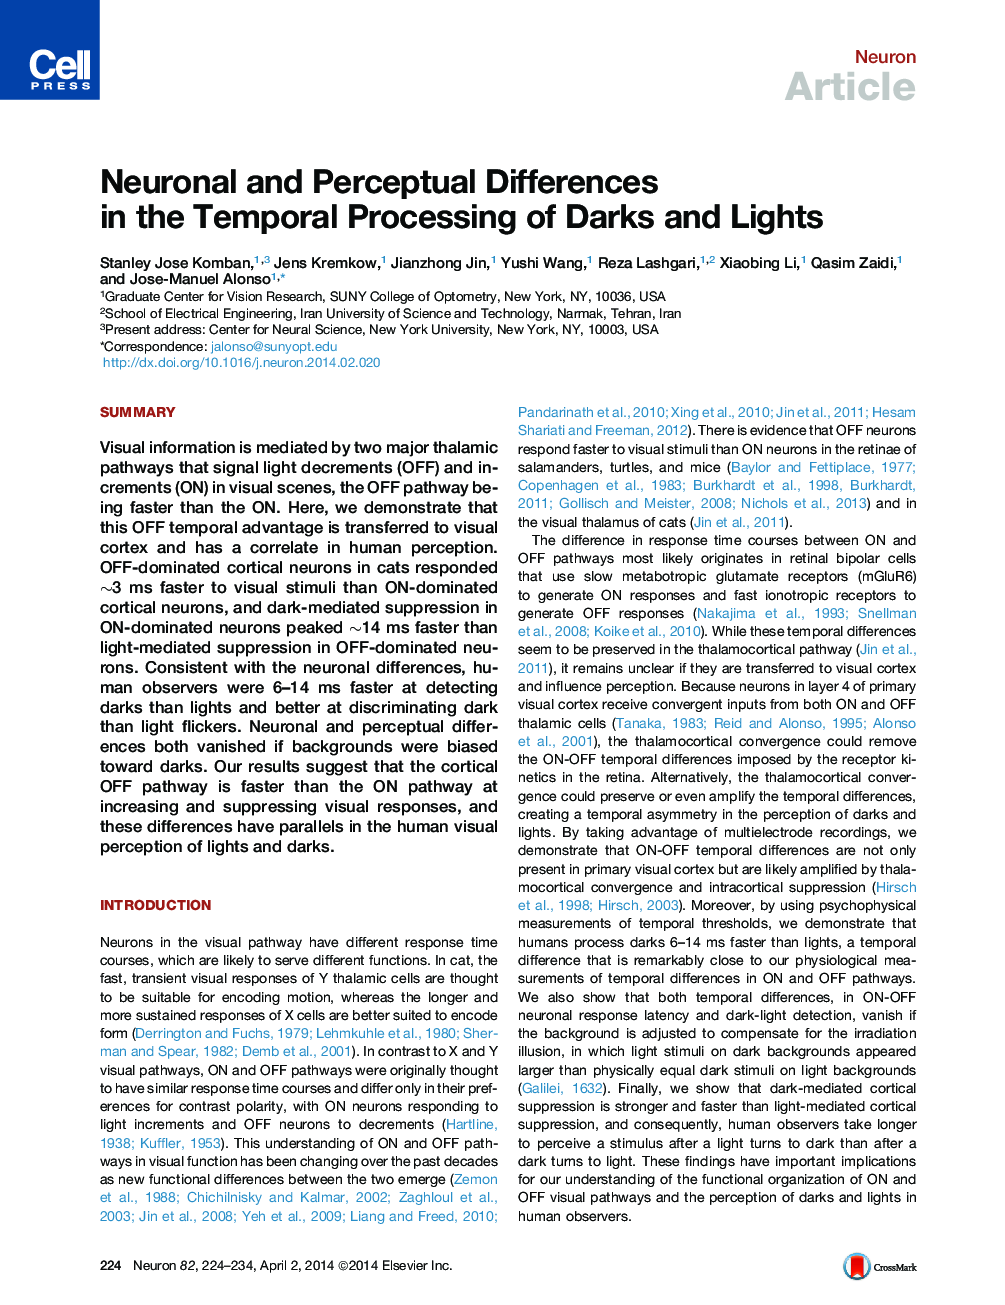 Neuronal and Perceptual Differences in the Temporal Processing of Darks and Lights